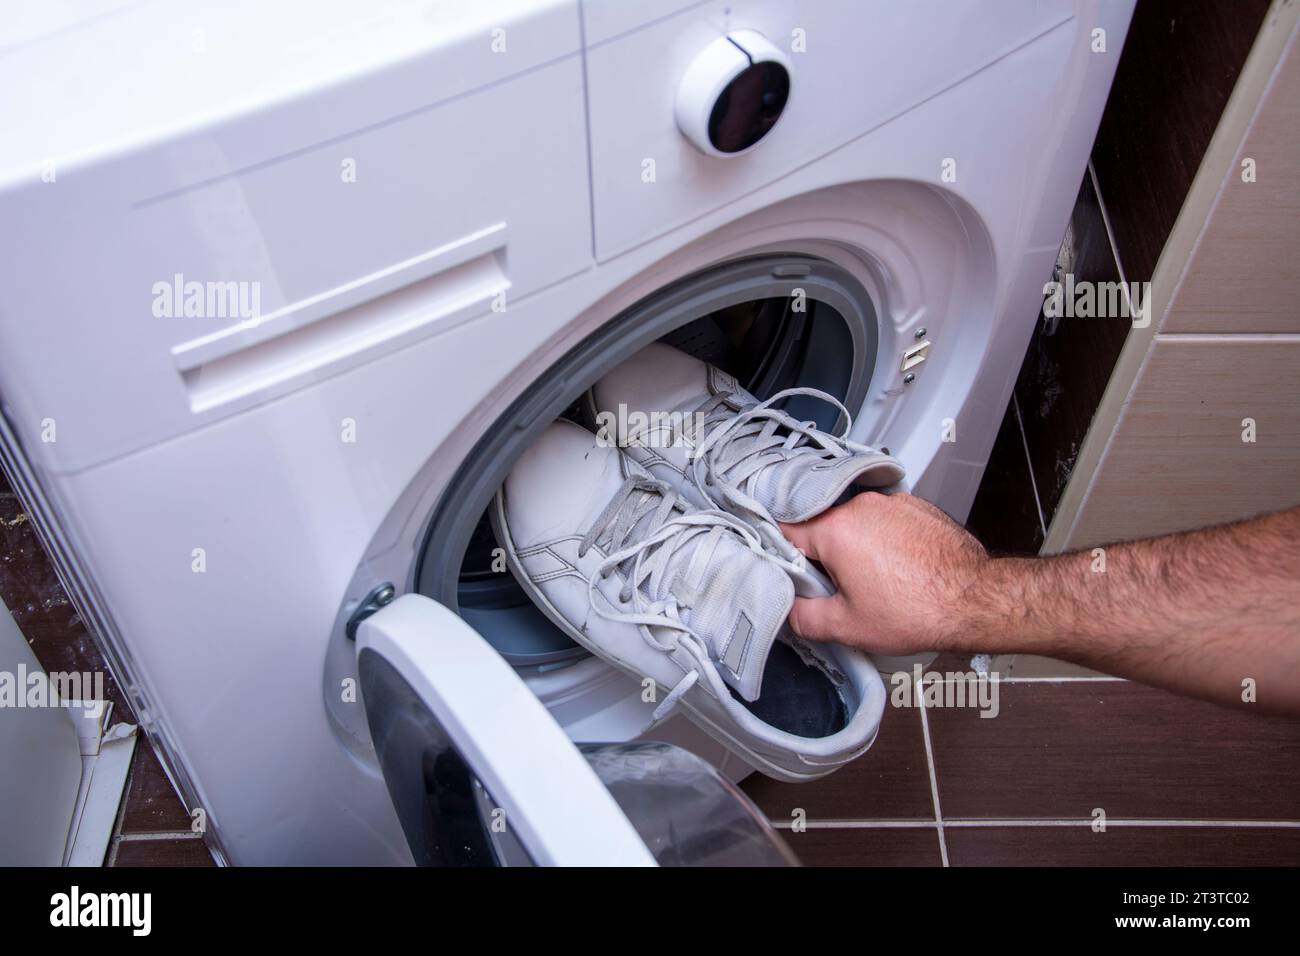 Top view of putting dirty old sneakers into washing machine Stock Photo